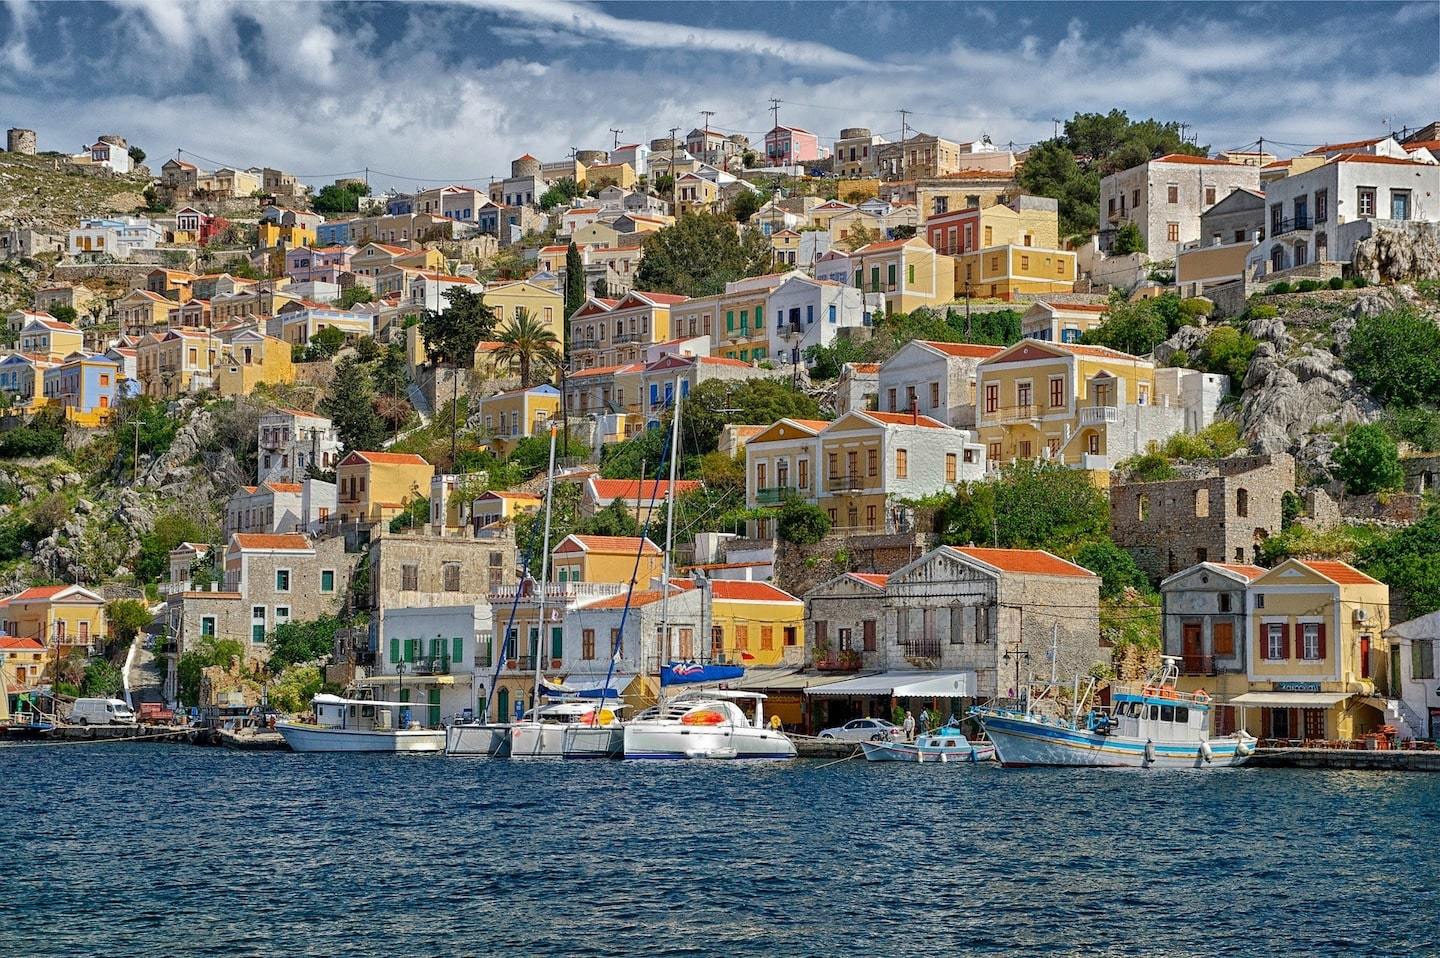 Greek island: colorful buildings on a hilltop with boats and sea in front in Symi Greece